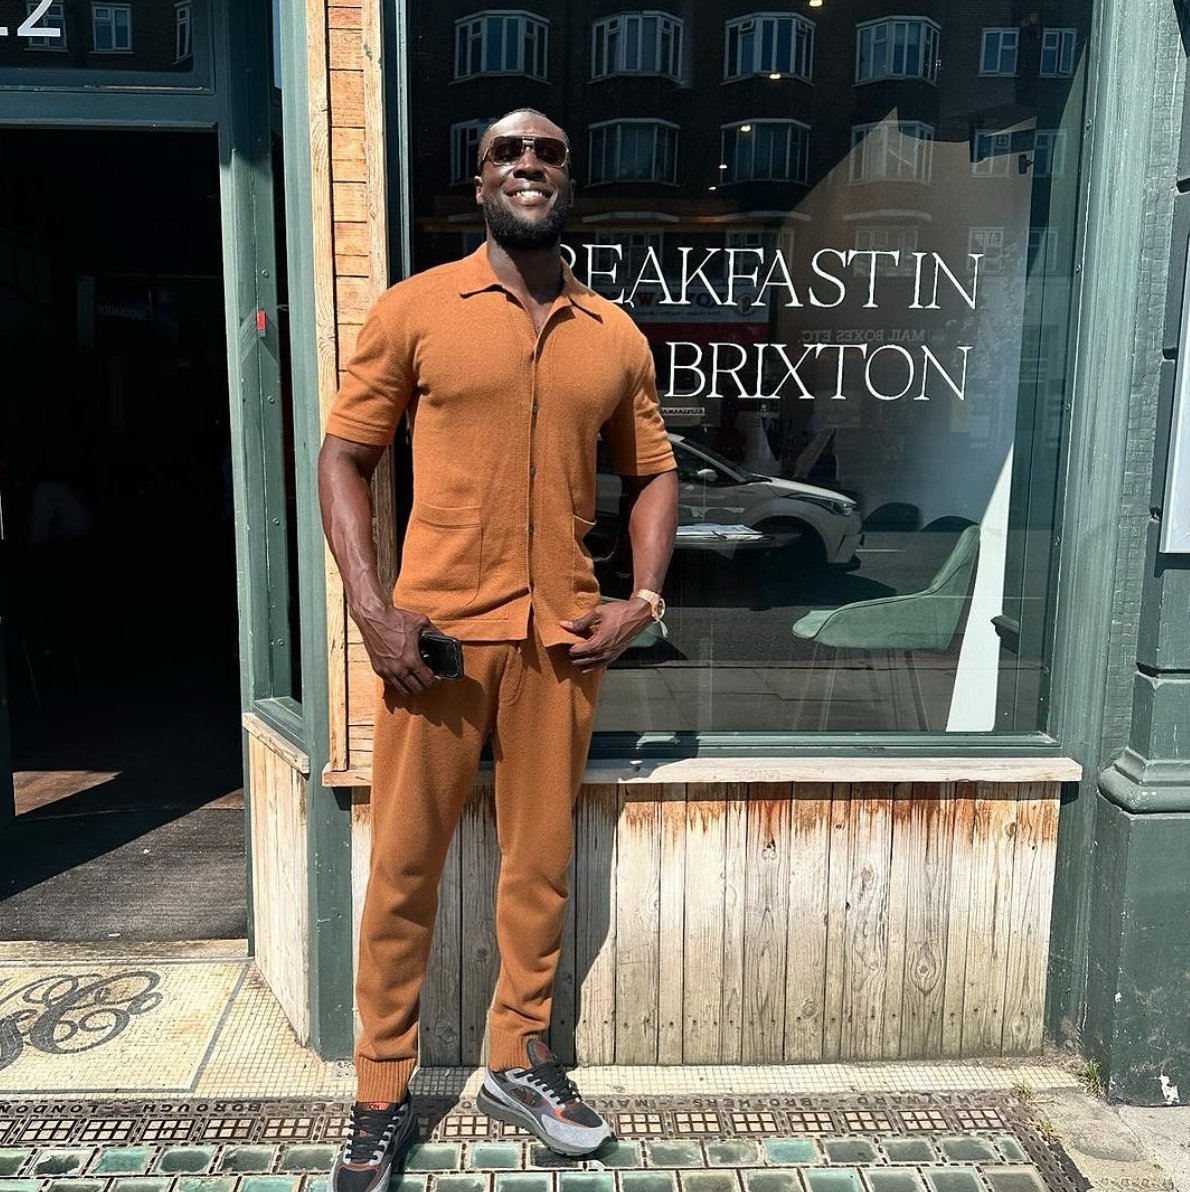 Nothing to see here! Just @stormzy dropping into Streatham High Road for Sunday brunch at 'Breakfast in Brixton' 👑

Eat, drink & play in Streatham. It’s where it’s at.

Tap here for more: instagram.com/p/C66LIYQIhz2/